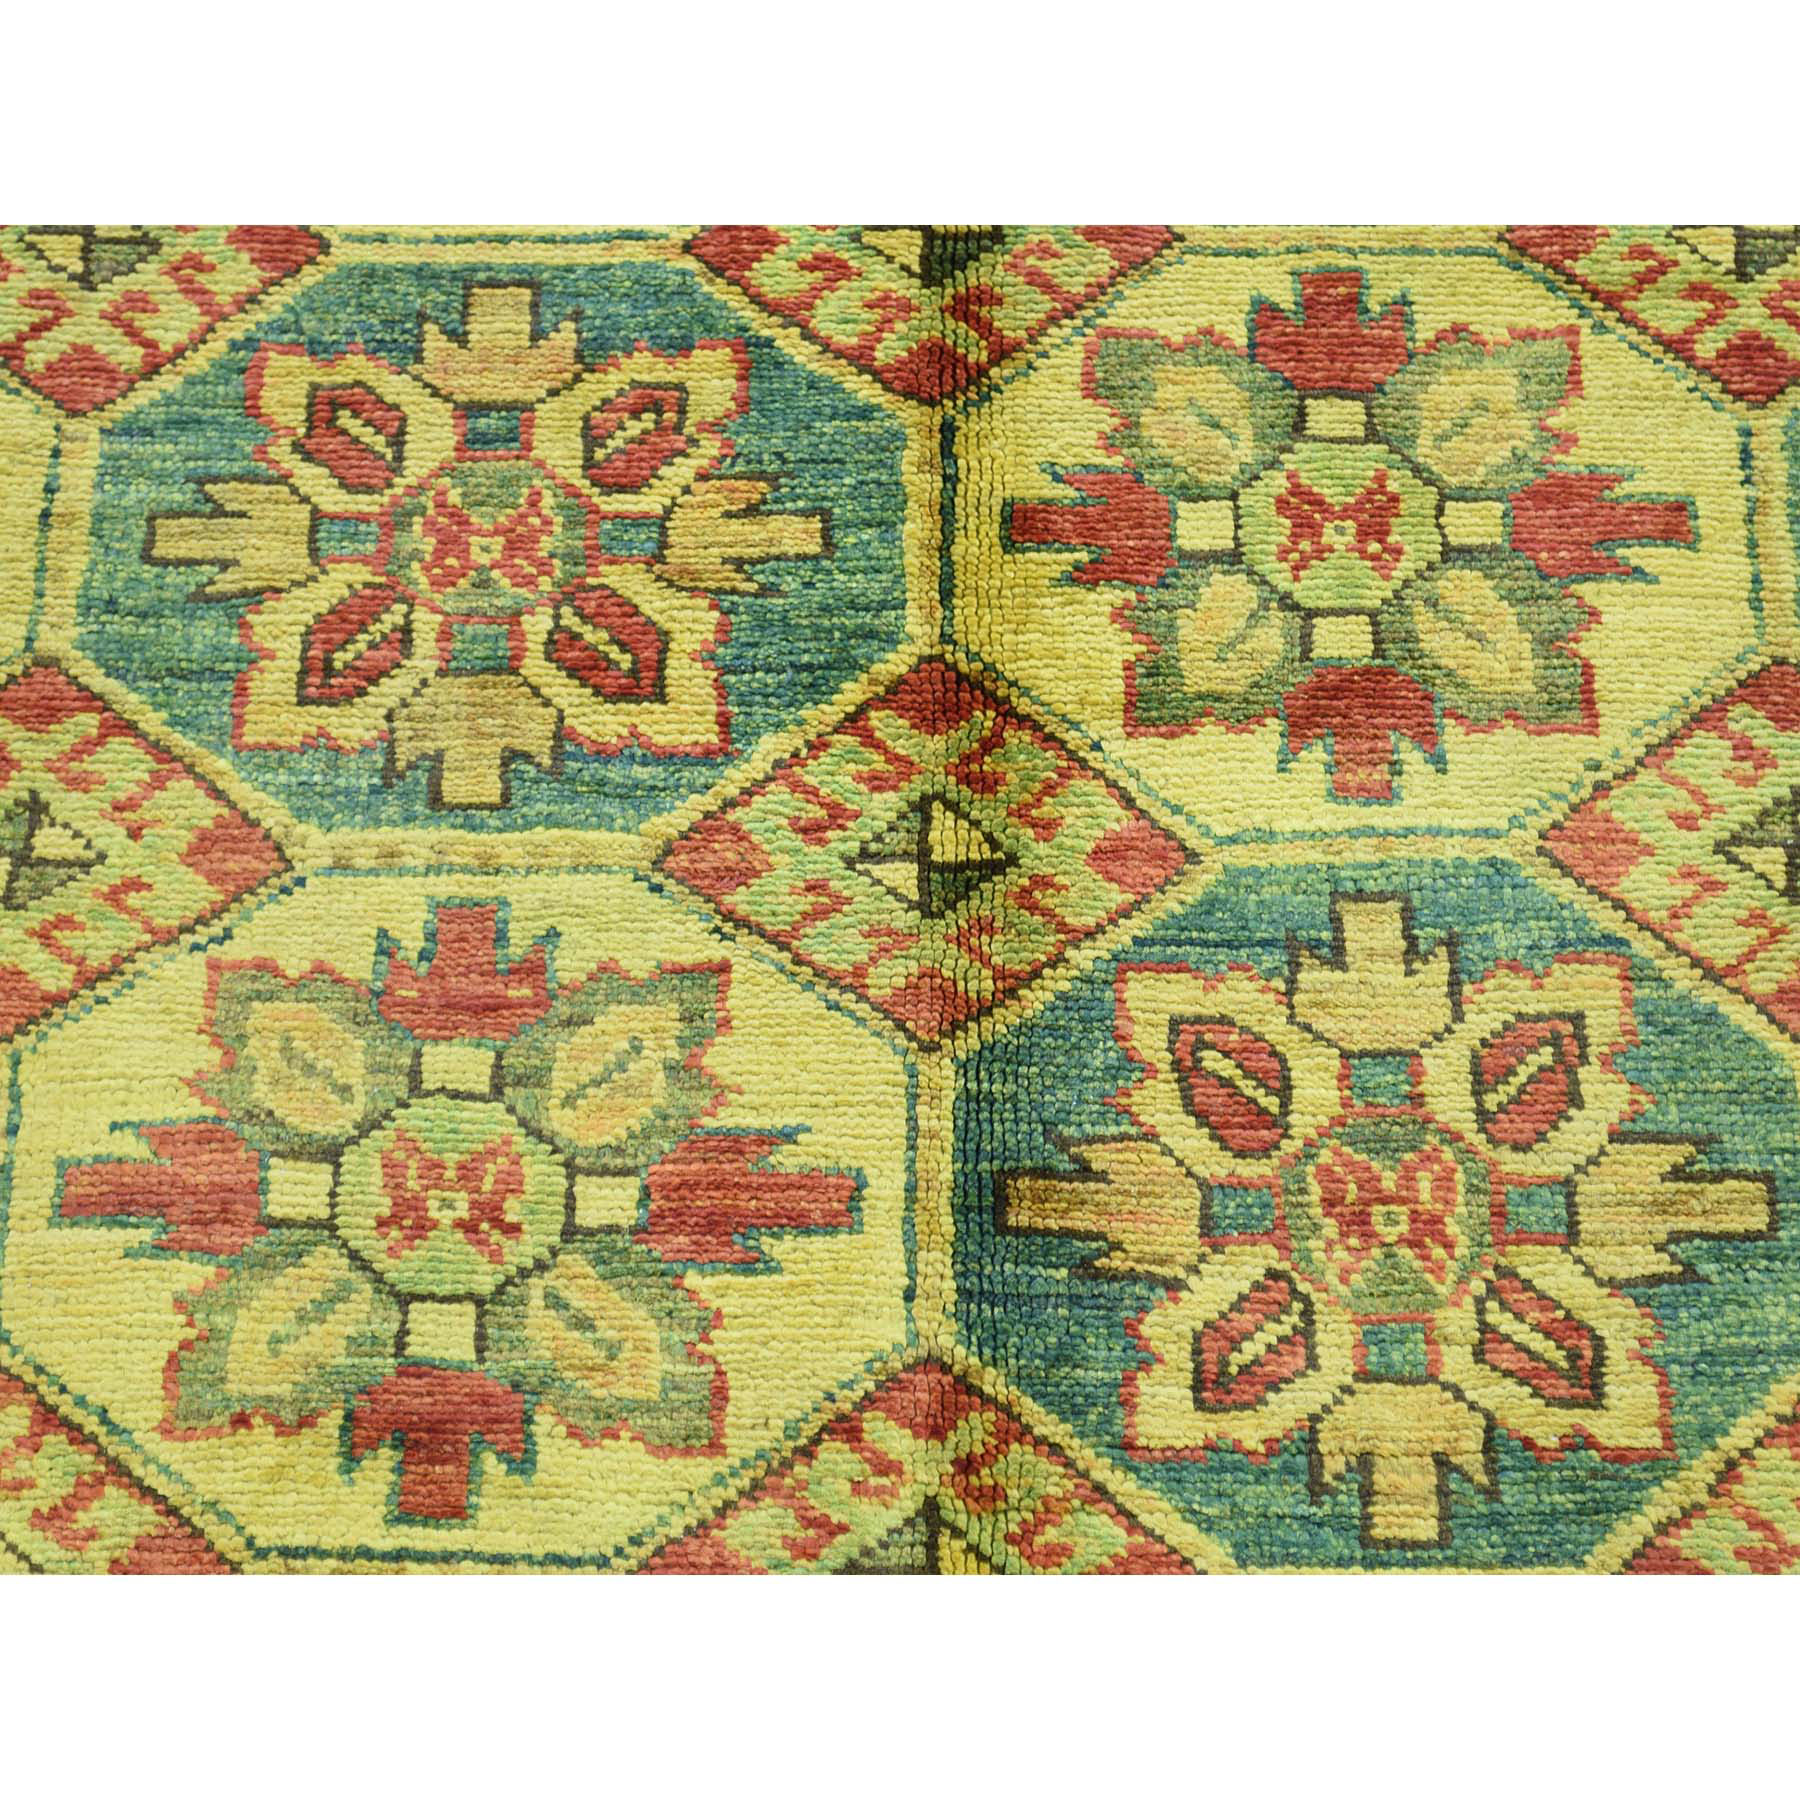 4-9 x6-7  Overdyed Super Kazak Hand-Knotted Pure Wool Oriental Rug 